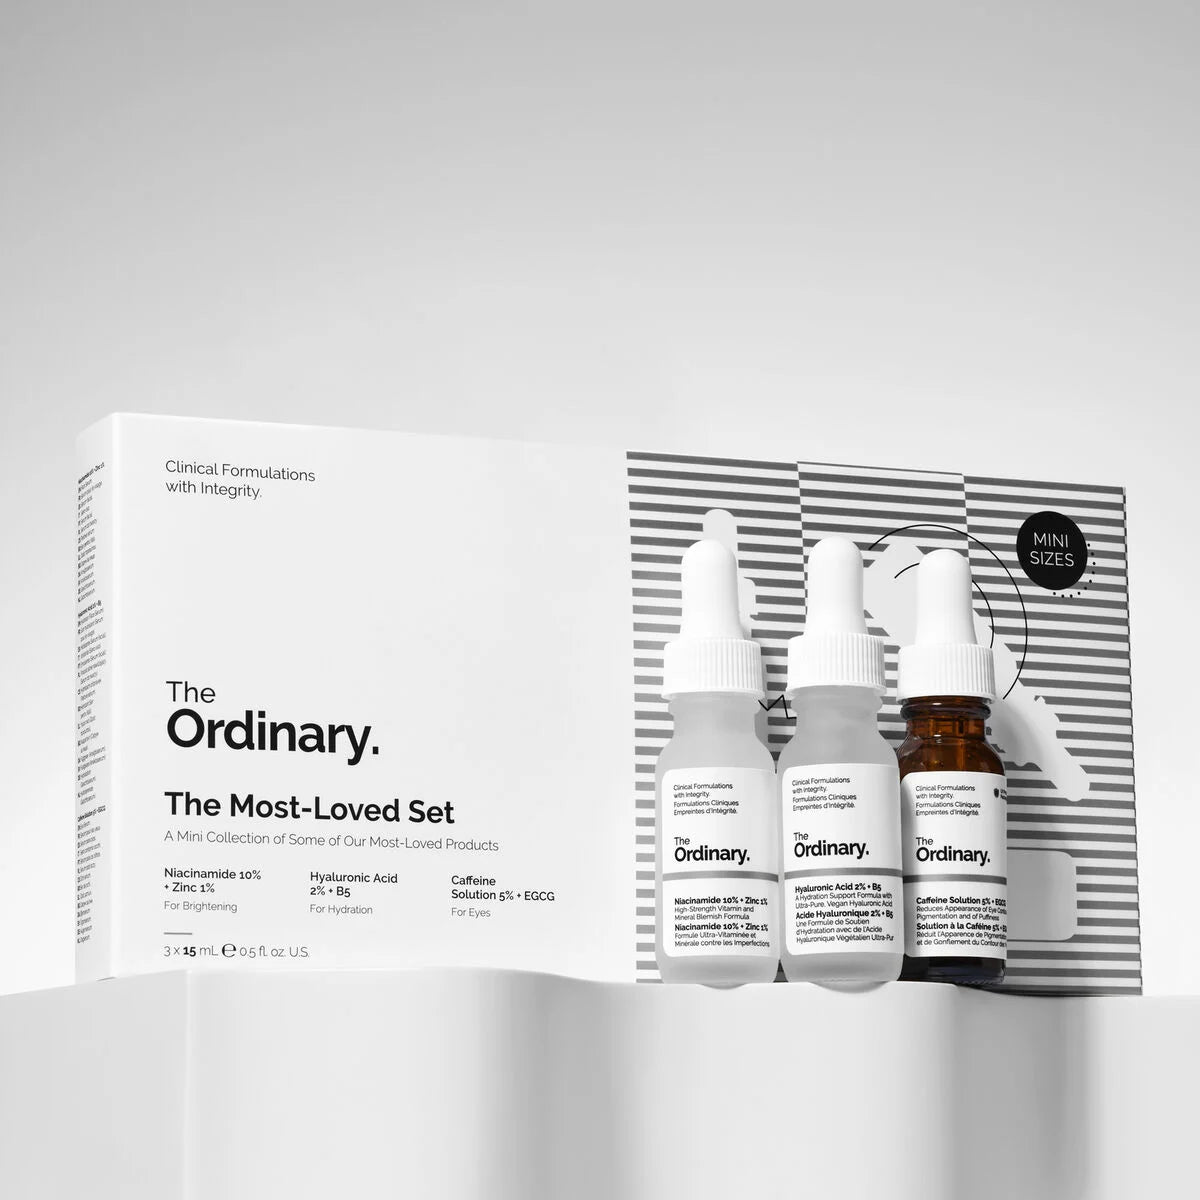 THE ORDINARY the most loved set a mini collection of some of our most loved products مجموعة المنتجات الاعلى مبيعاً من اورديناري